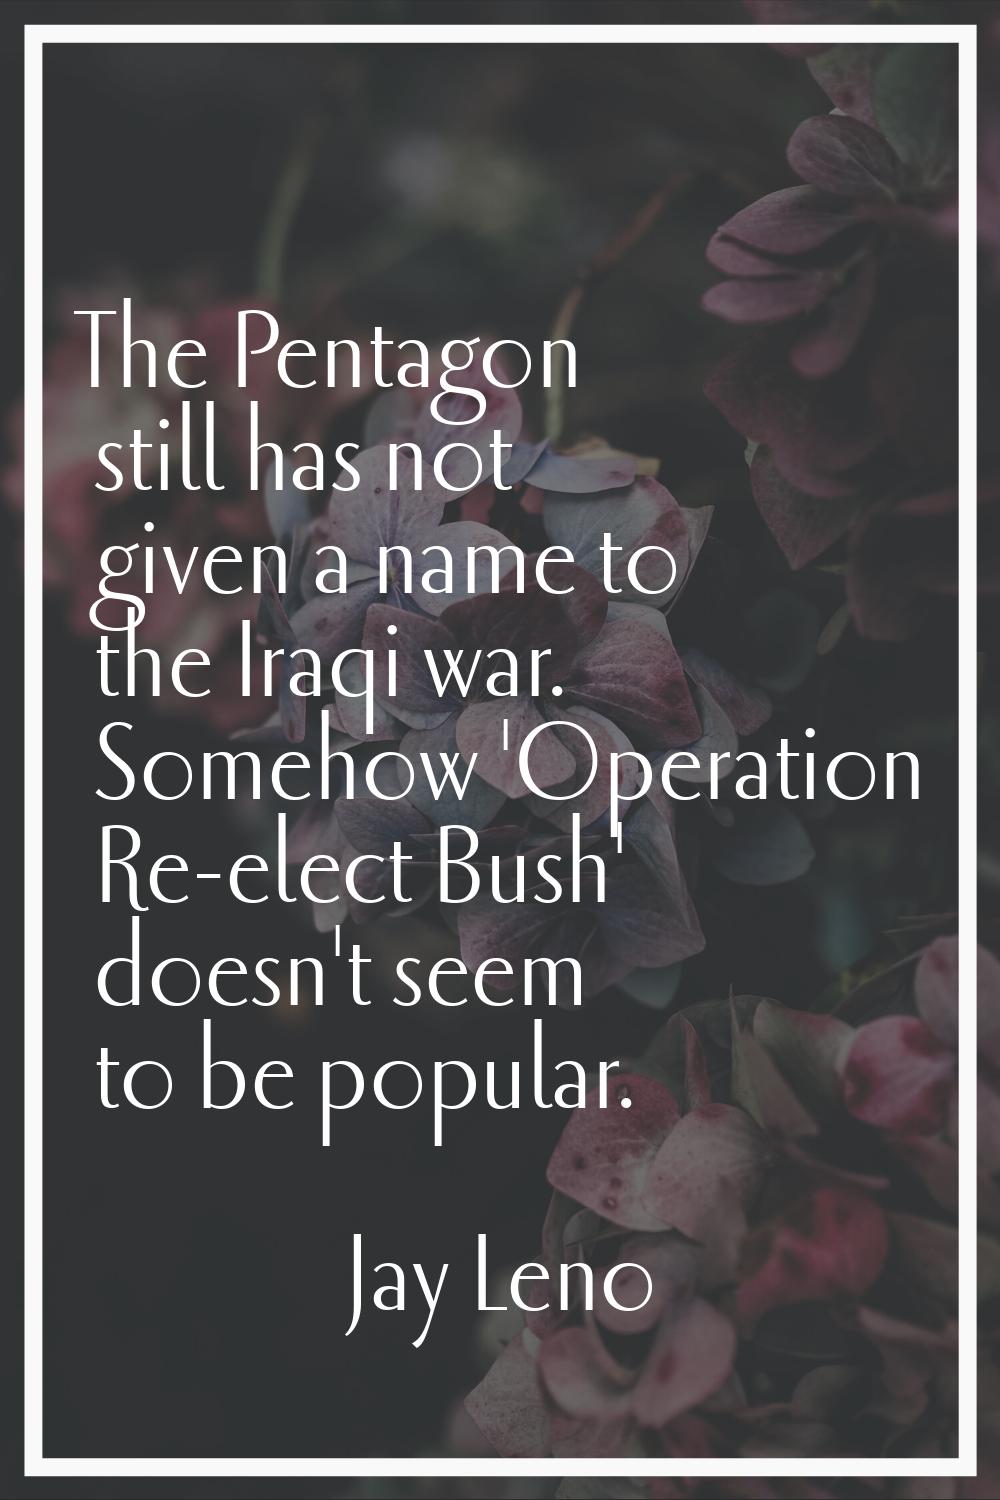 The Pentagon still has not given a name to the Iraqi war. Somehow 'Operation Re-elect Bush' doesn't